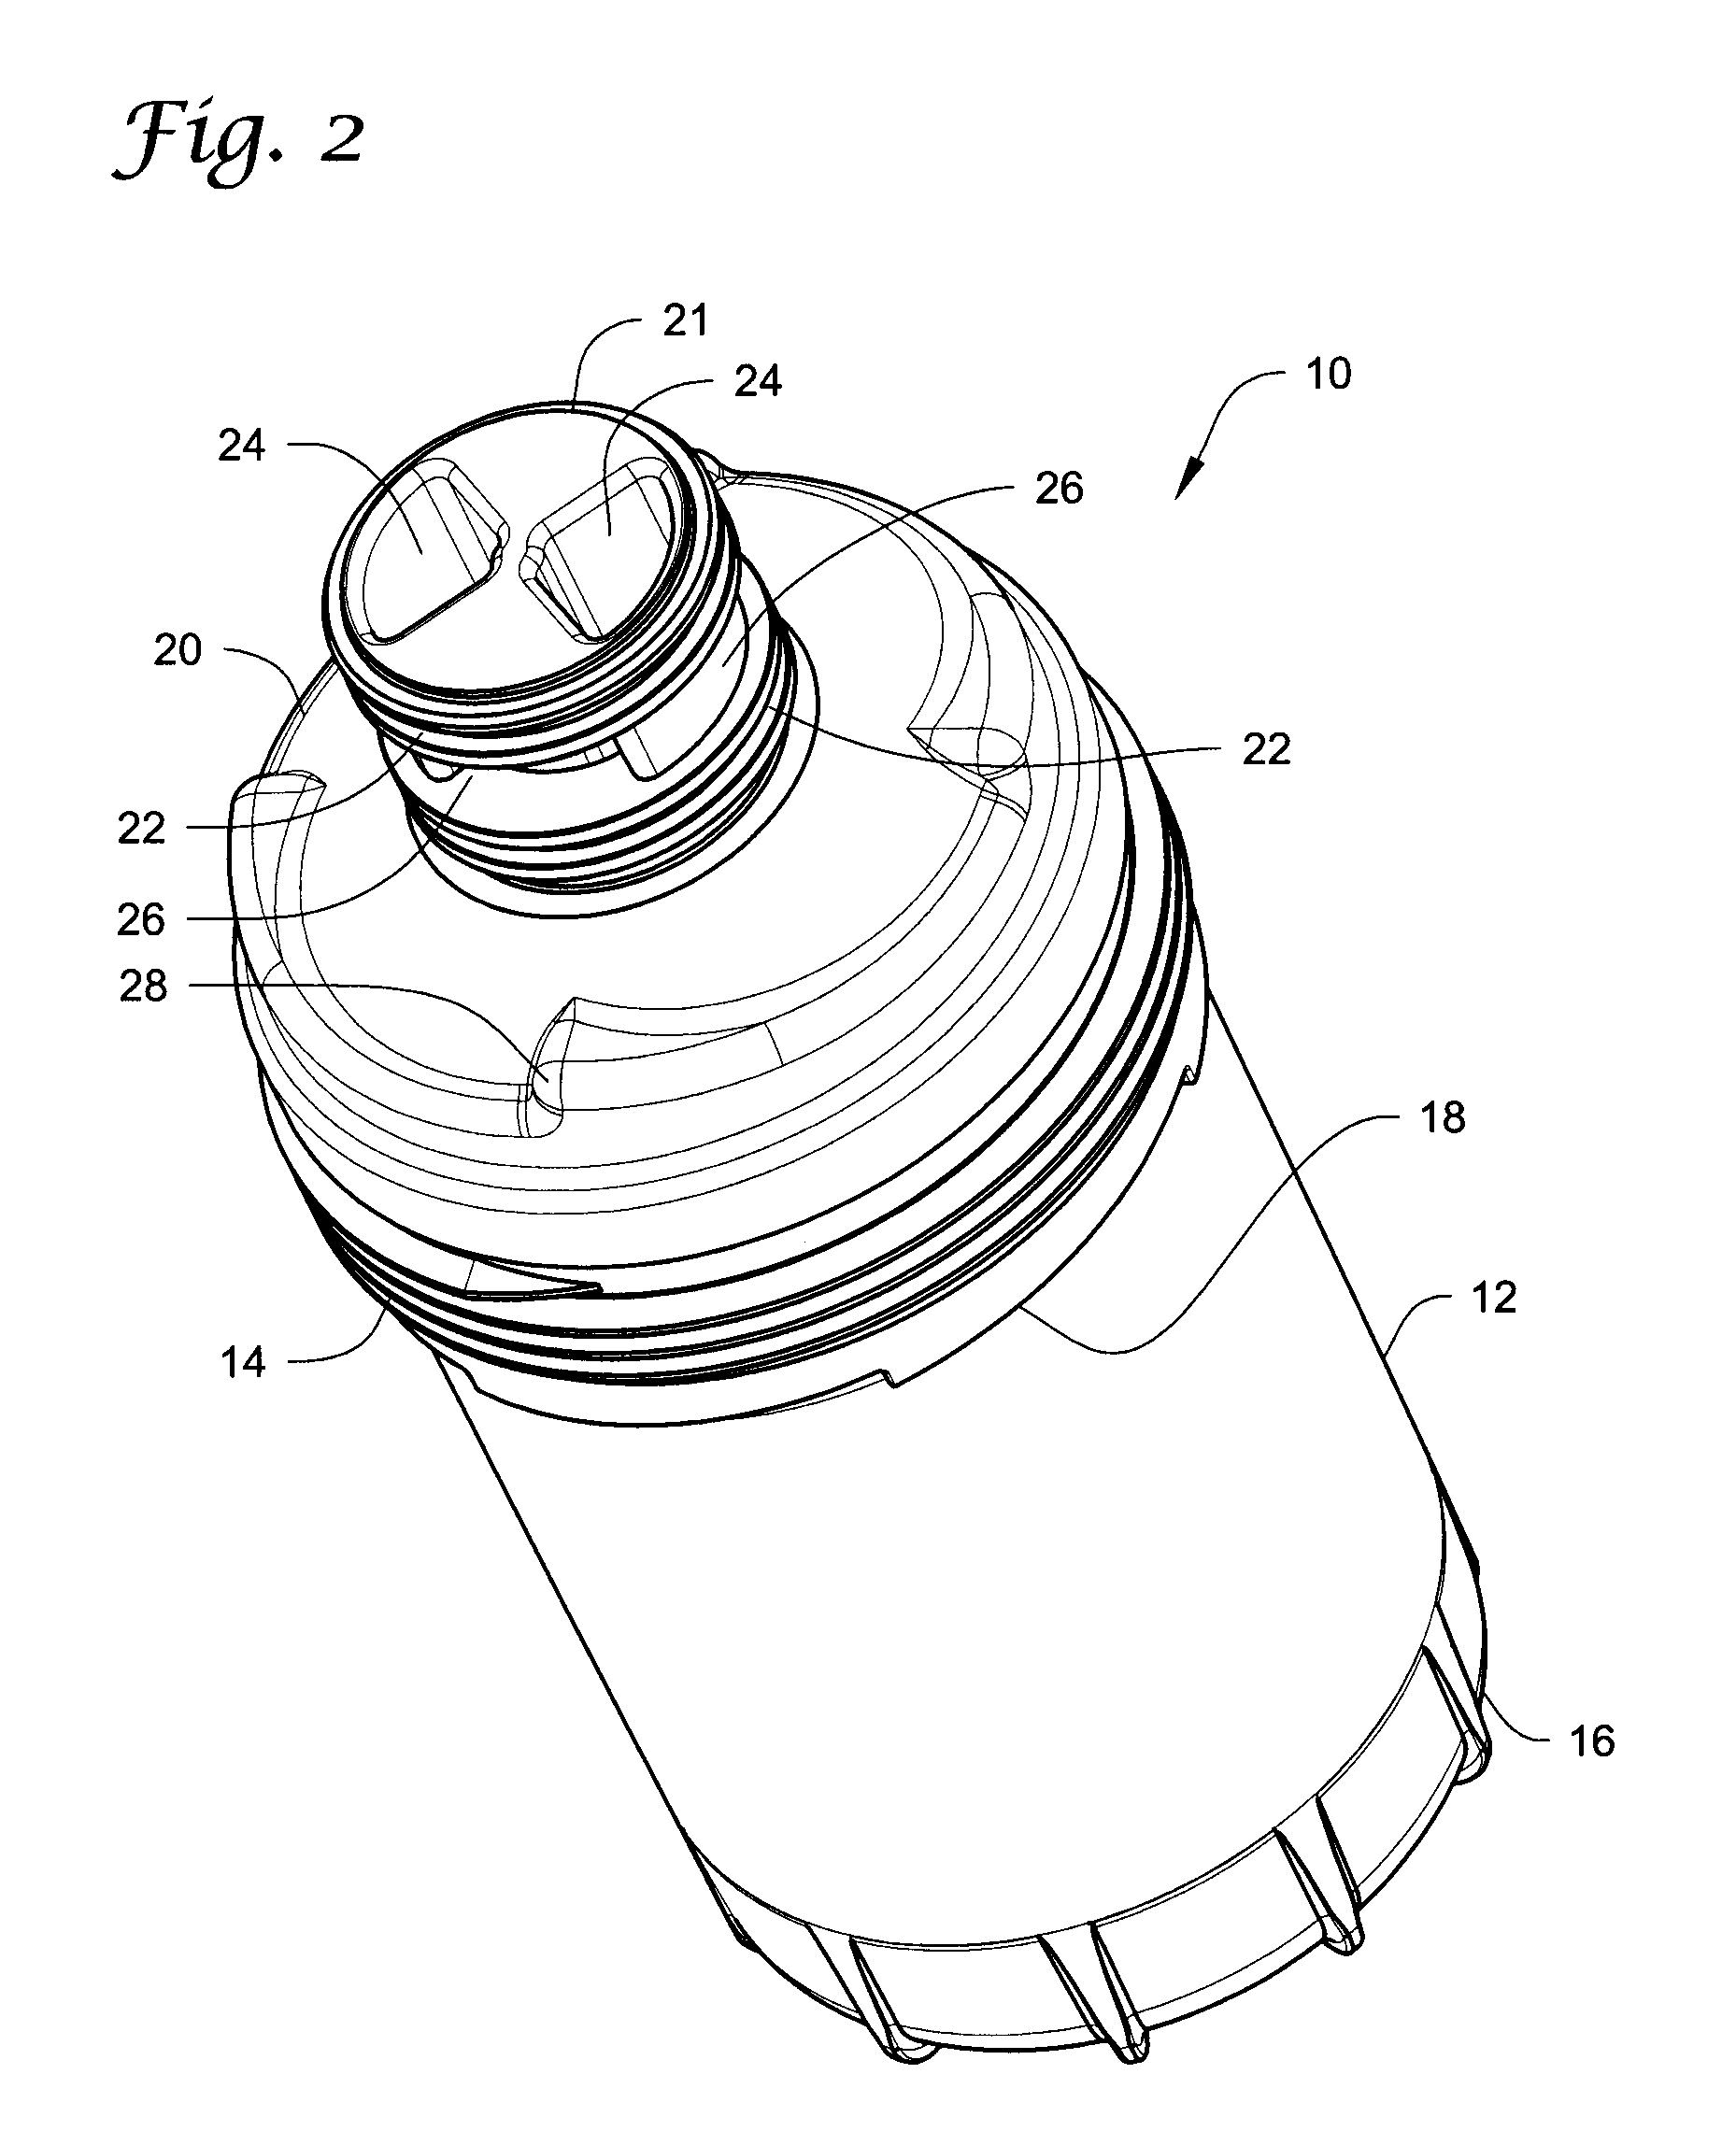 Fluid filter with localized flow attachment